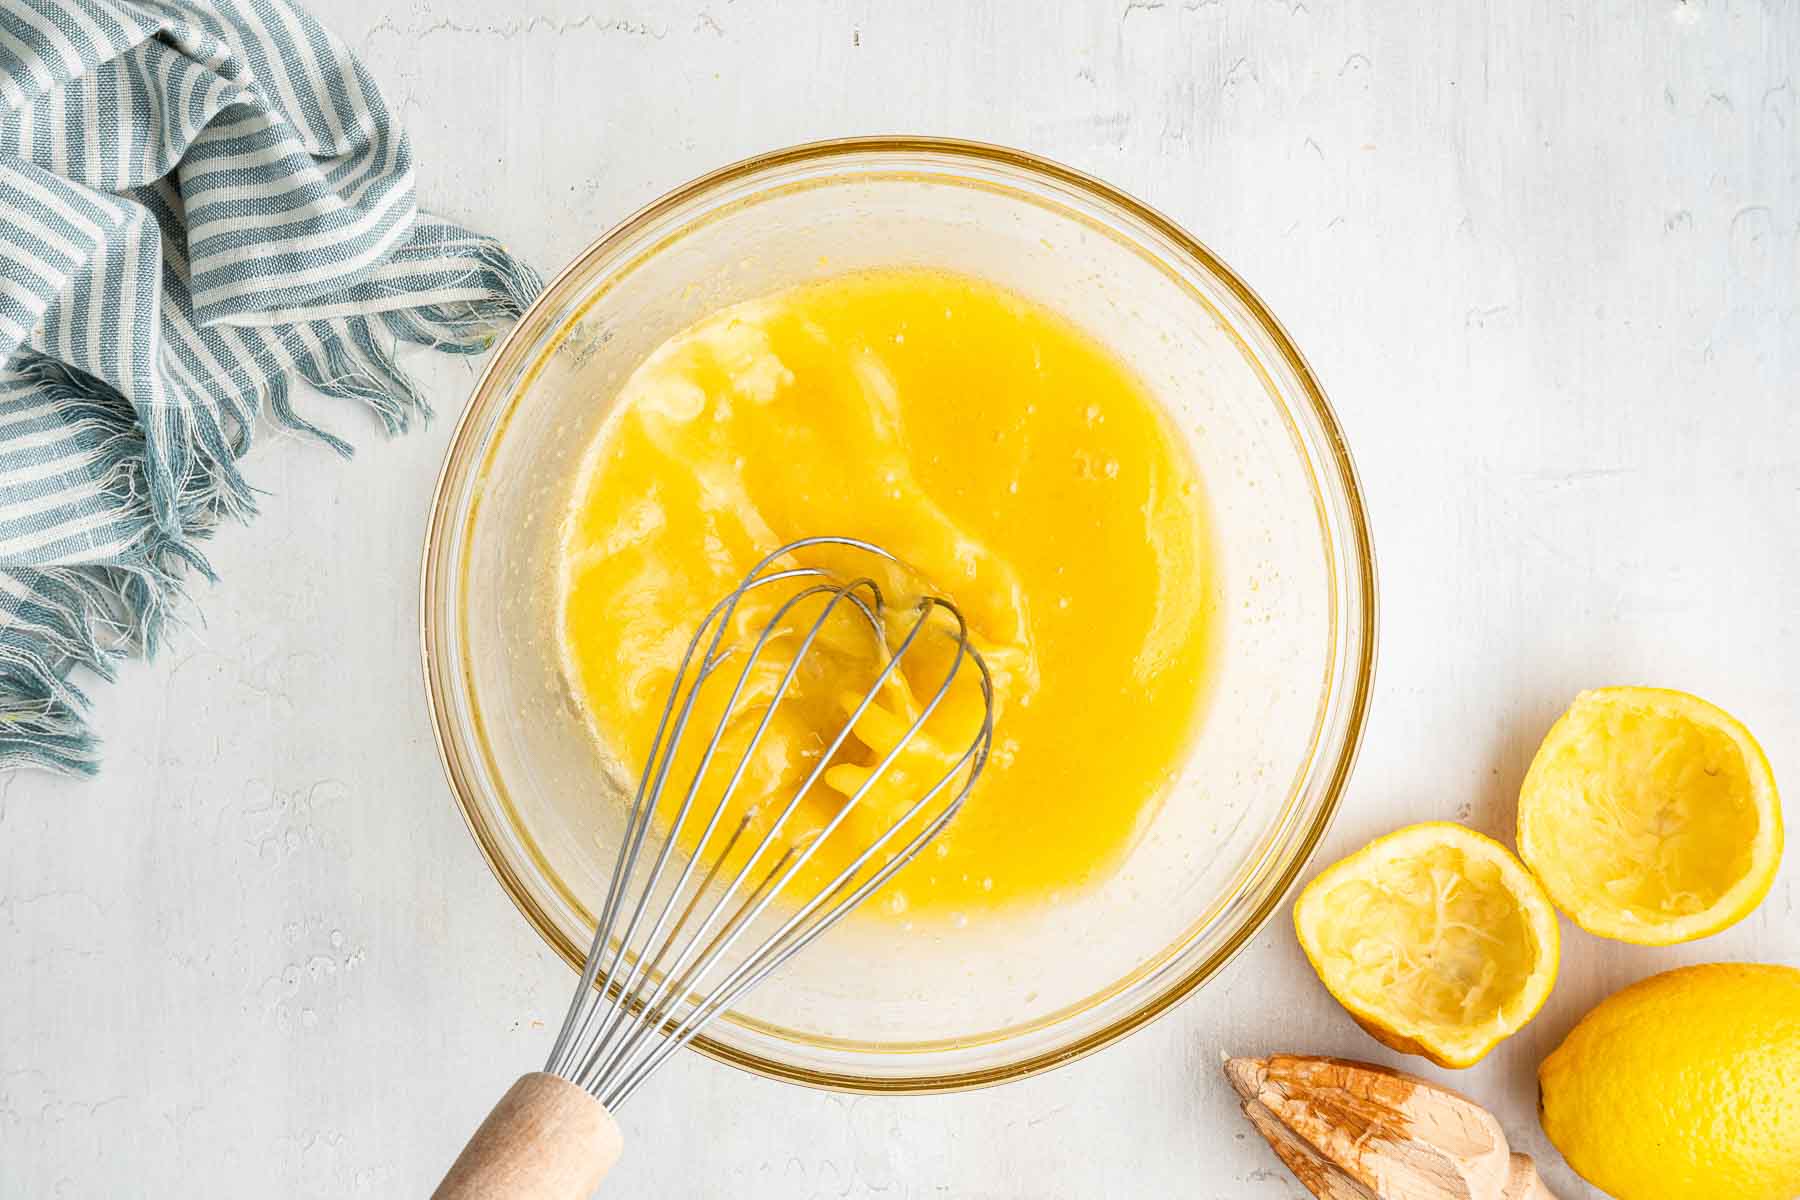 Whisk in a bowl with yellow liquid and lemon peels on side.